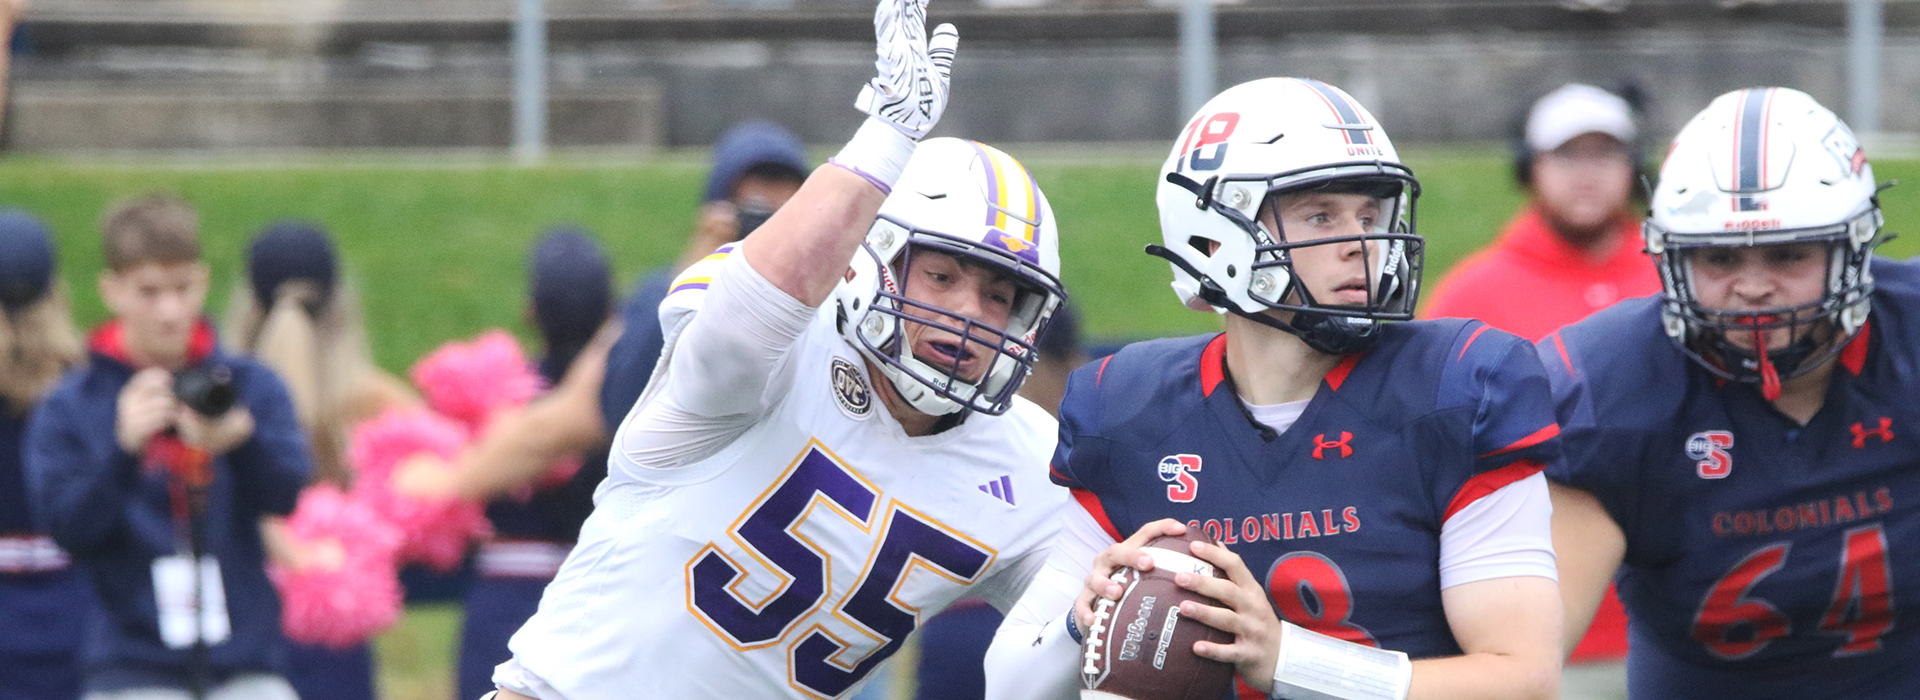 Golden Eagles score on three turnovers to top Robert Morris